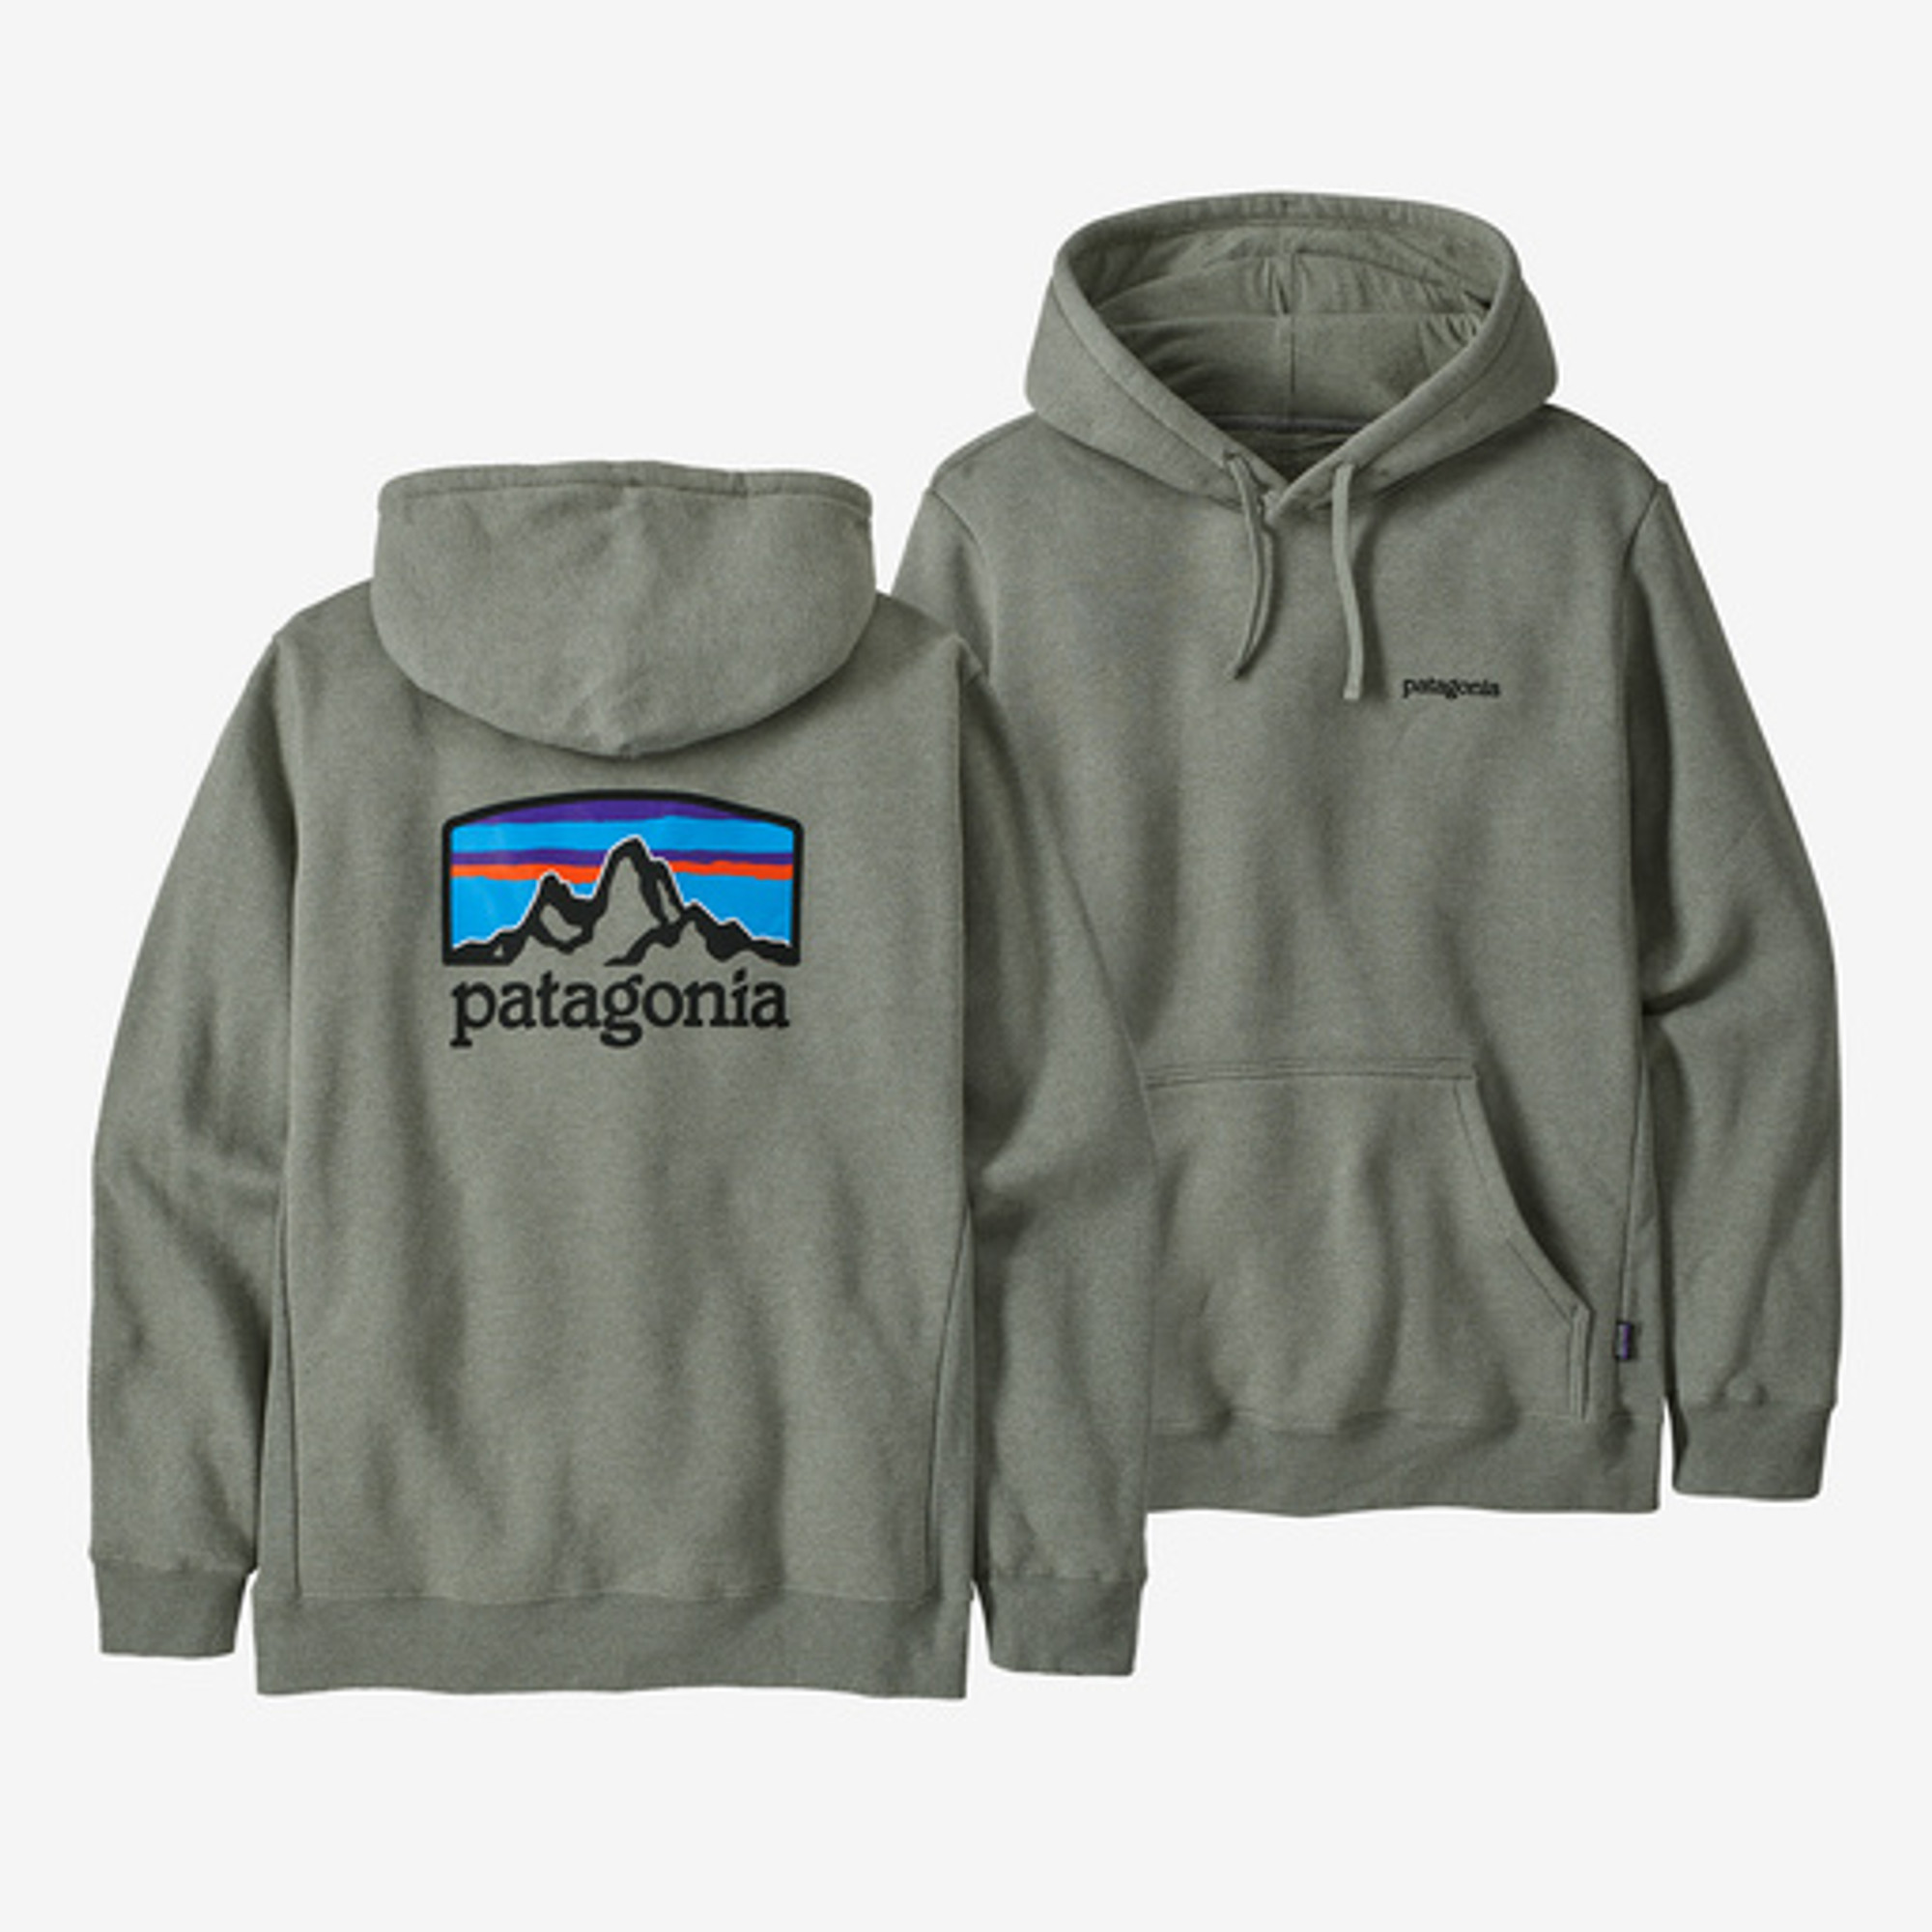 Patagonia Home Water Trout Uprisal Hoody Black - S